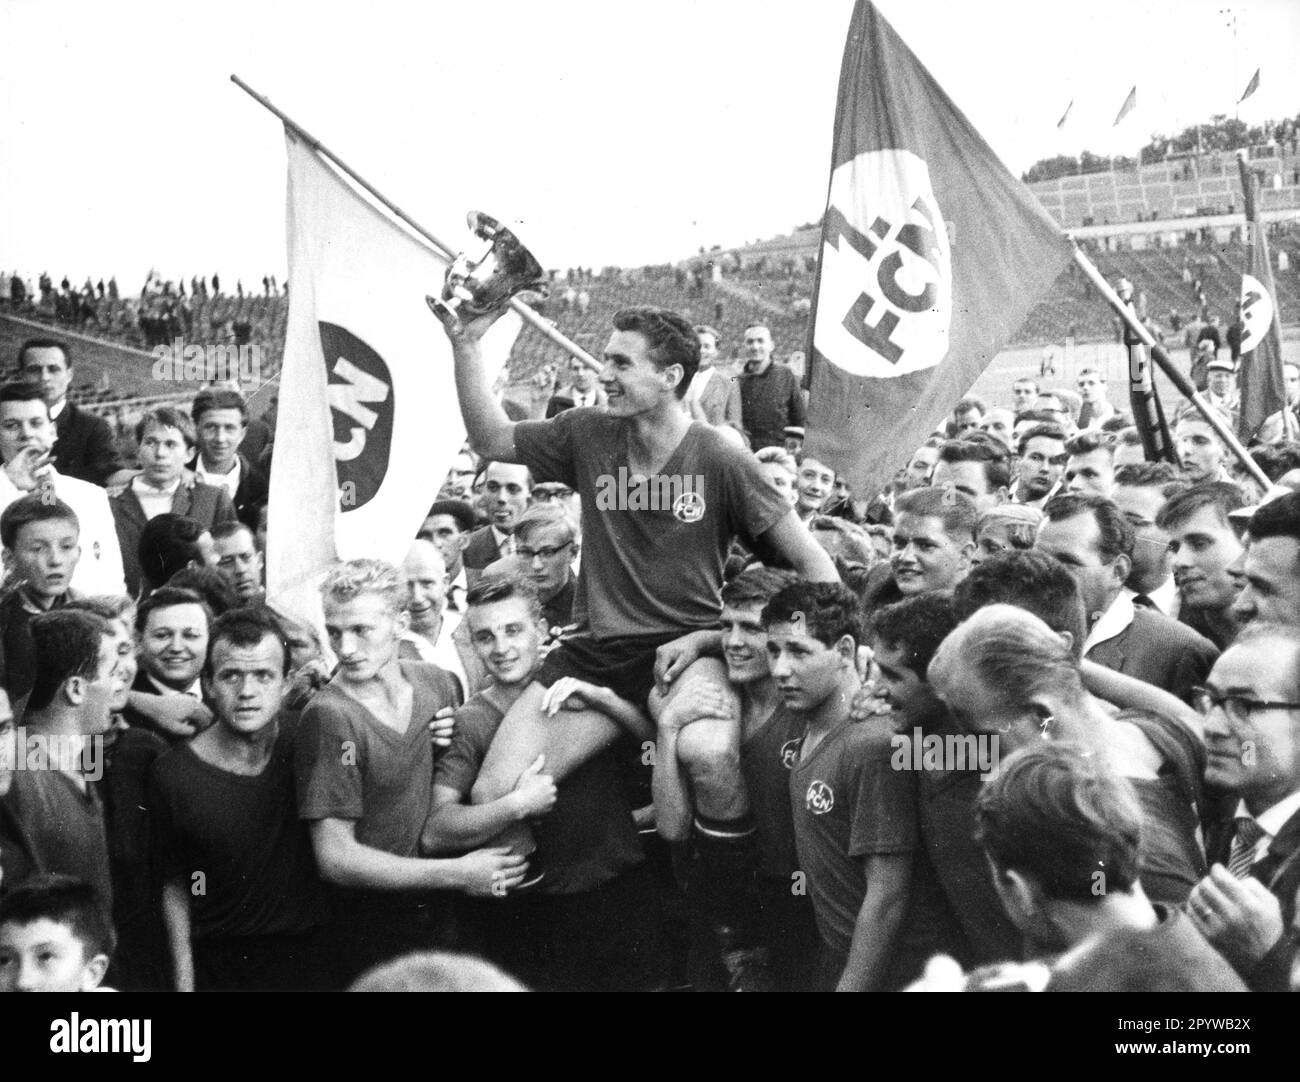 DFB Cup final 29.08.1962 in Hanover. 1. FC Nuremberg - Fortuna Dusseldorf 2:1 n.V. Nuremberg's team captain Ferdinand Wenauer is carried off the field on his shoulders. For journalistic use only! Only for editorial use! [automated translation] Stock Photo